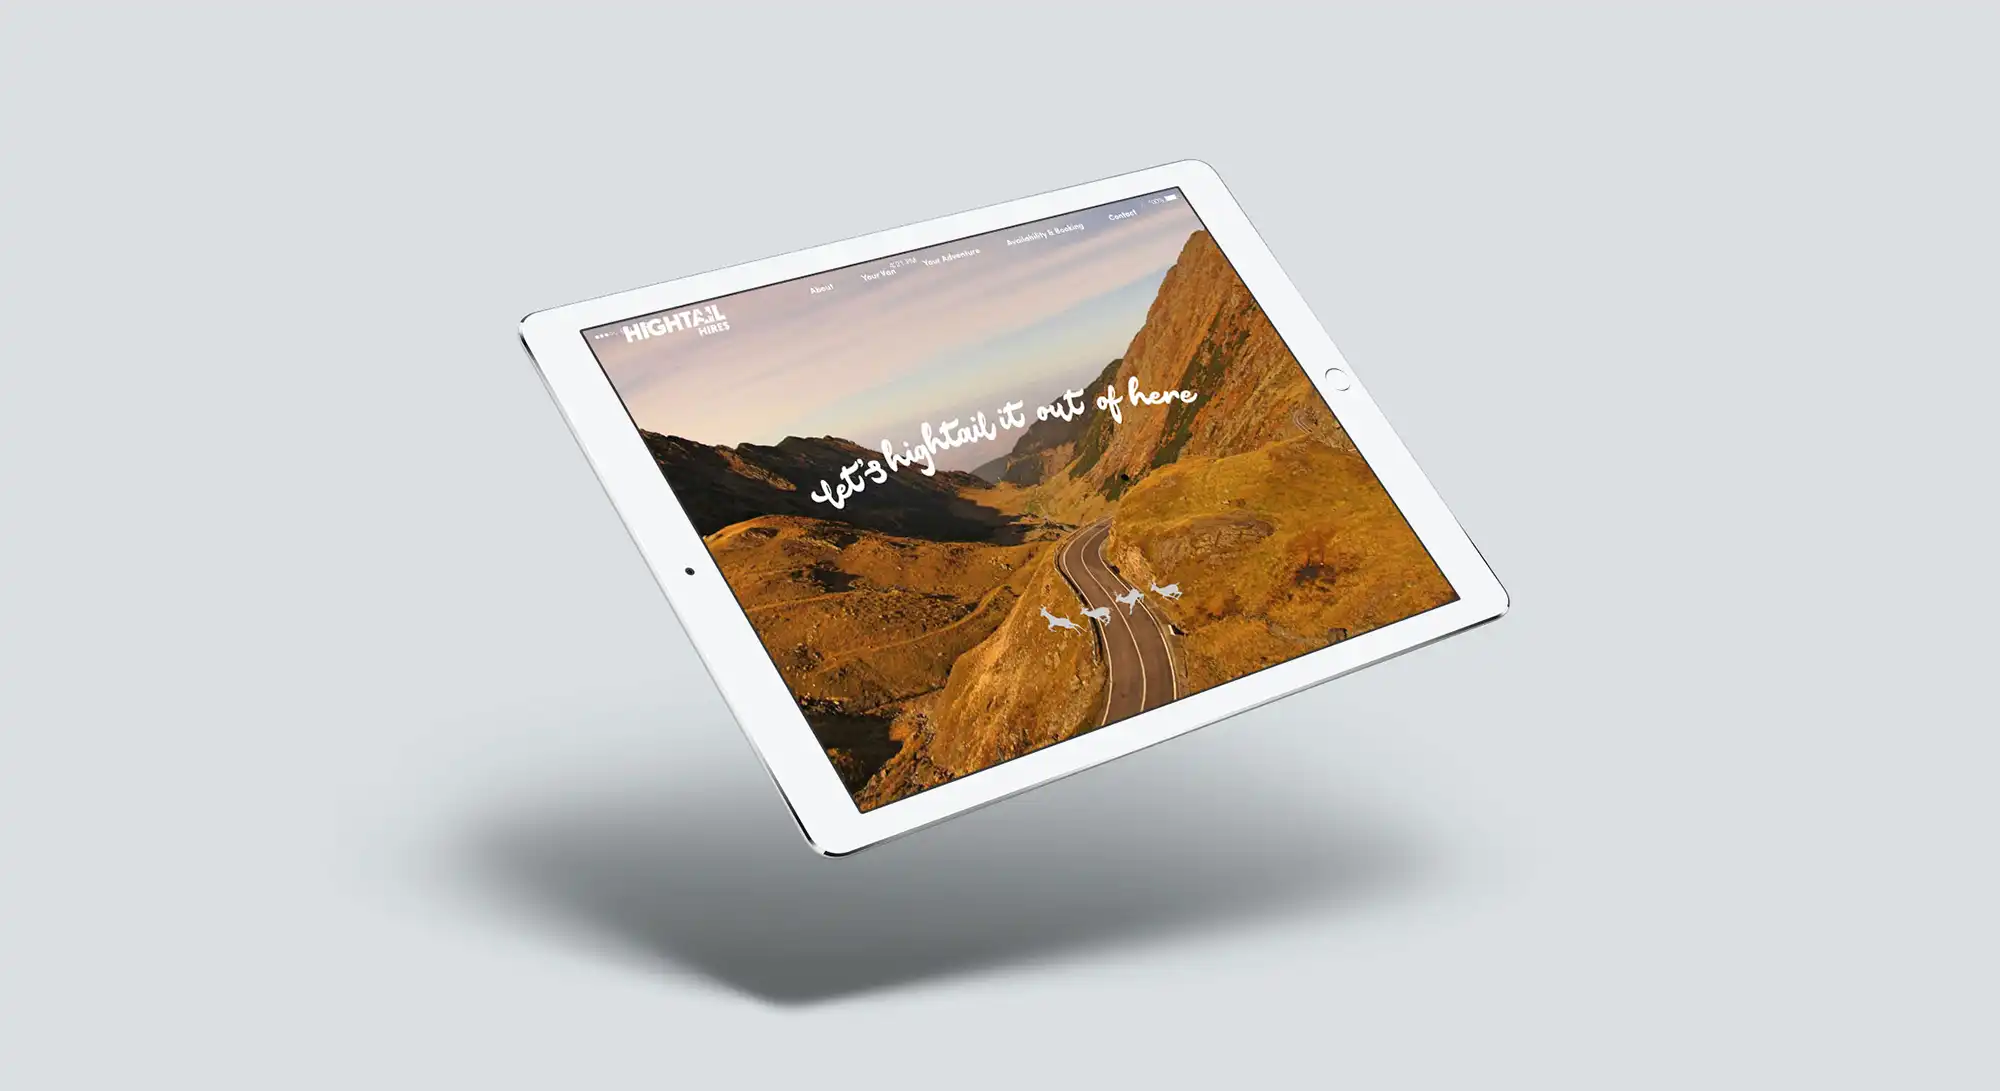 Outdoor website design shown on an iPad tablet device